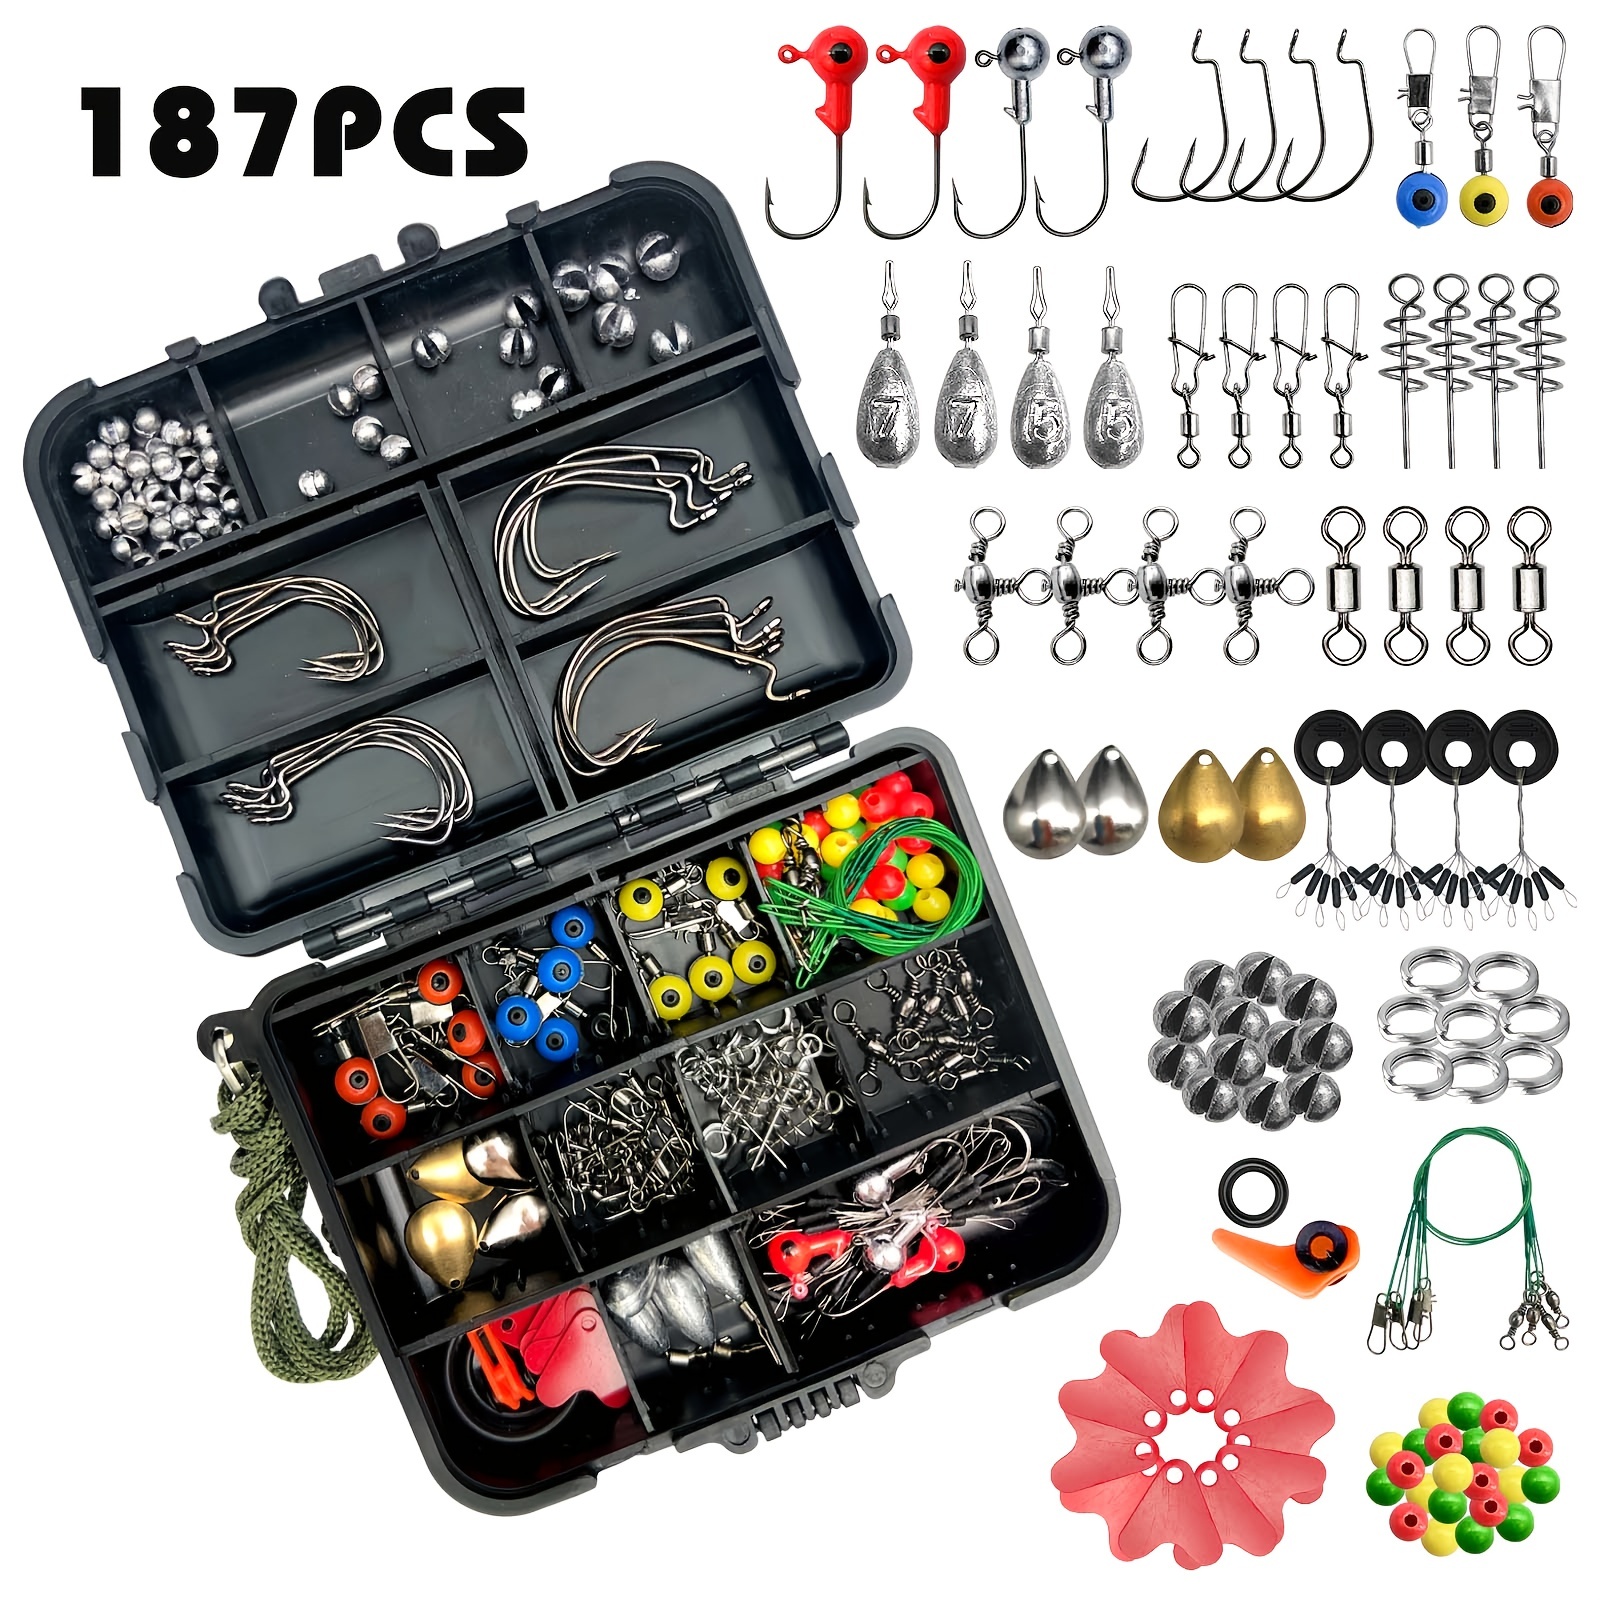 187pcs Fishing Accessories Kit Set - Including Tackle Box, Fish Hooks, Bait  Parts * - Perfect For Outdoor Fishing